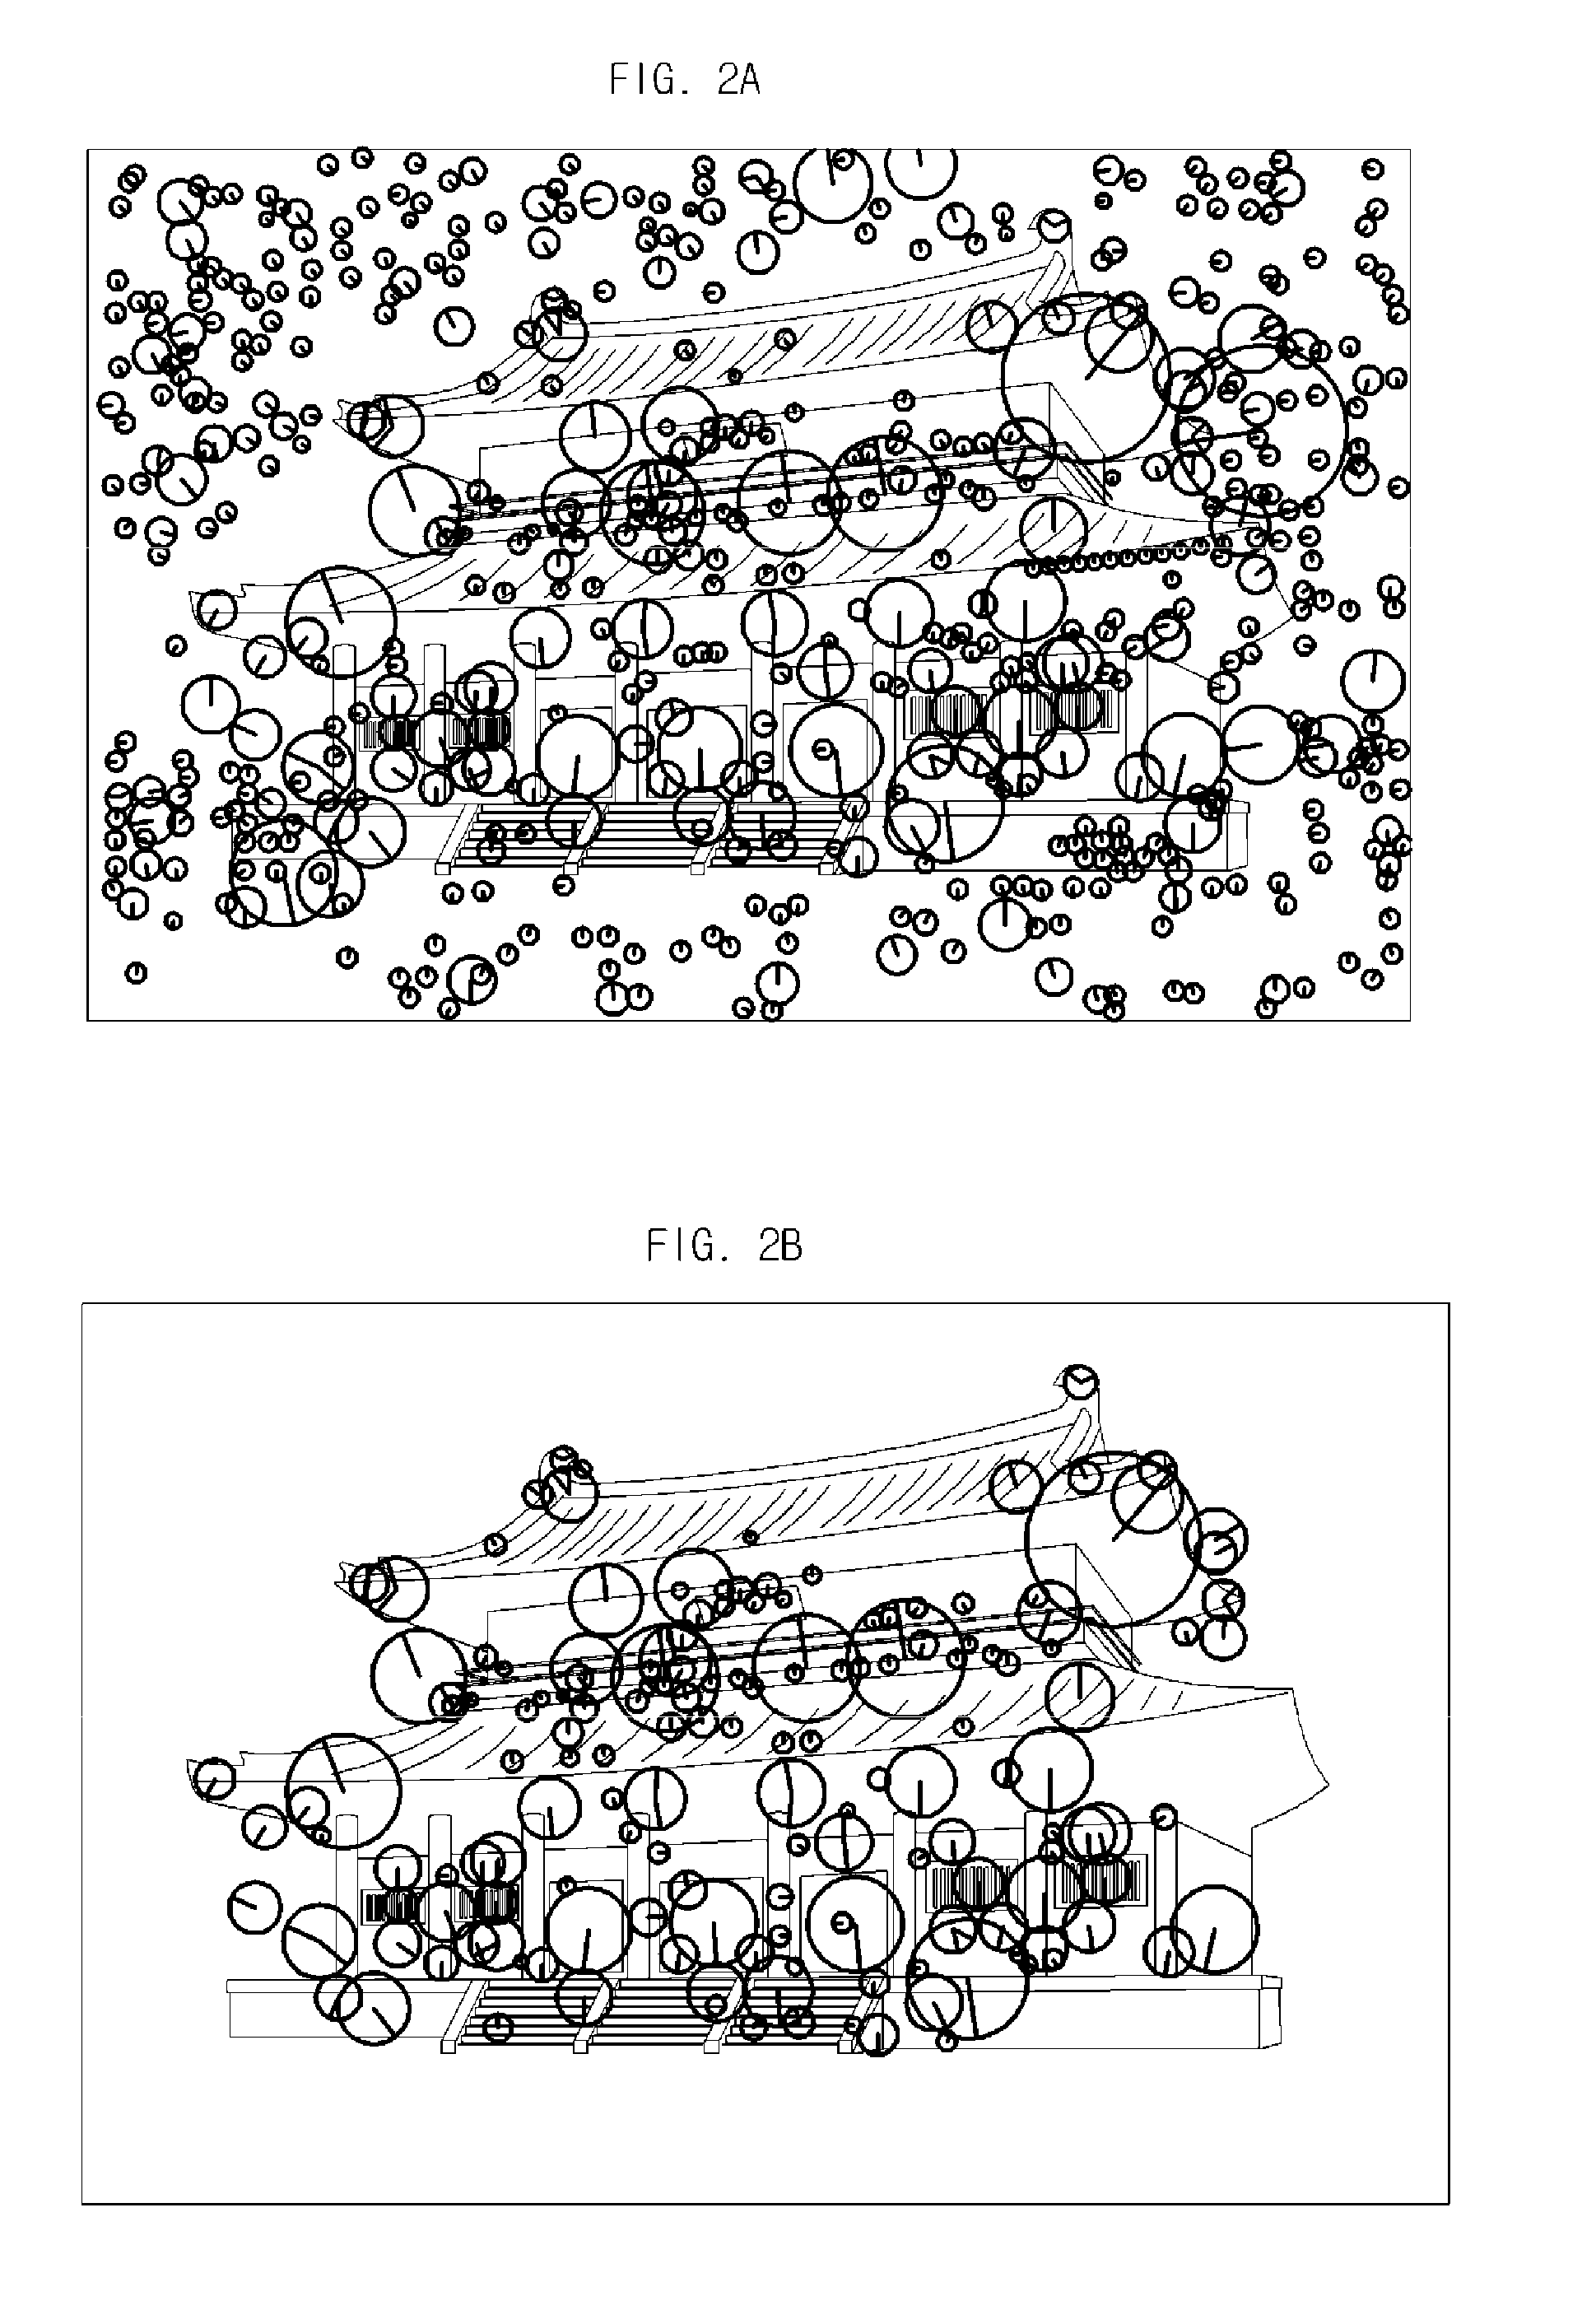 Method of extracting visual descriptor using feature selection and system for the same